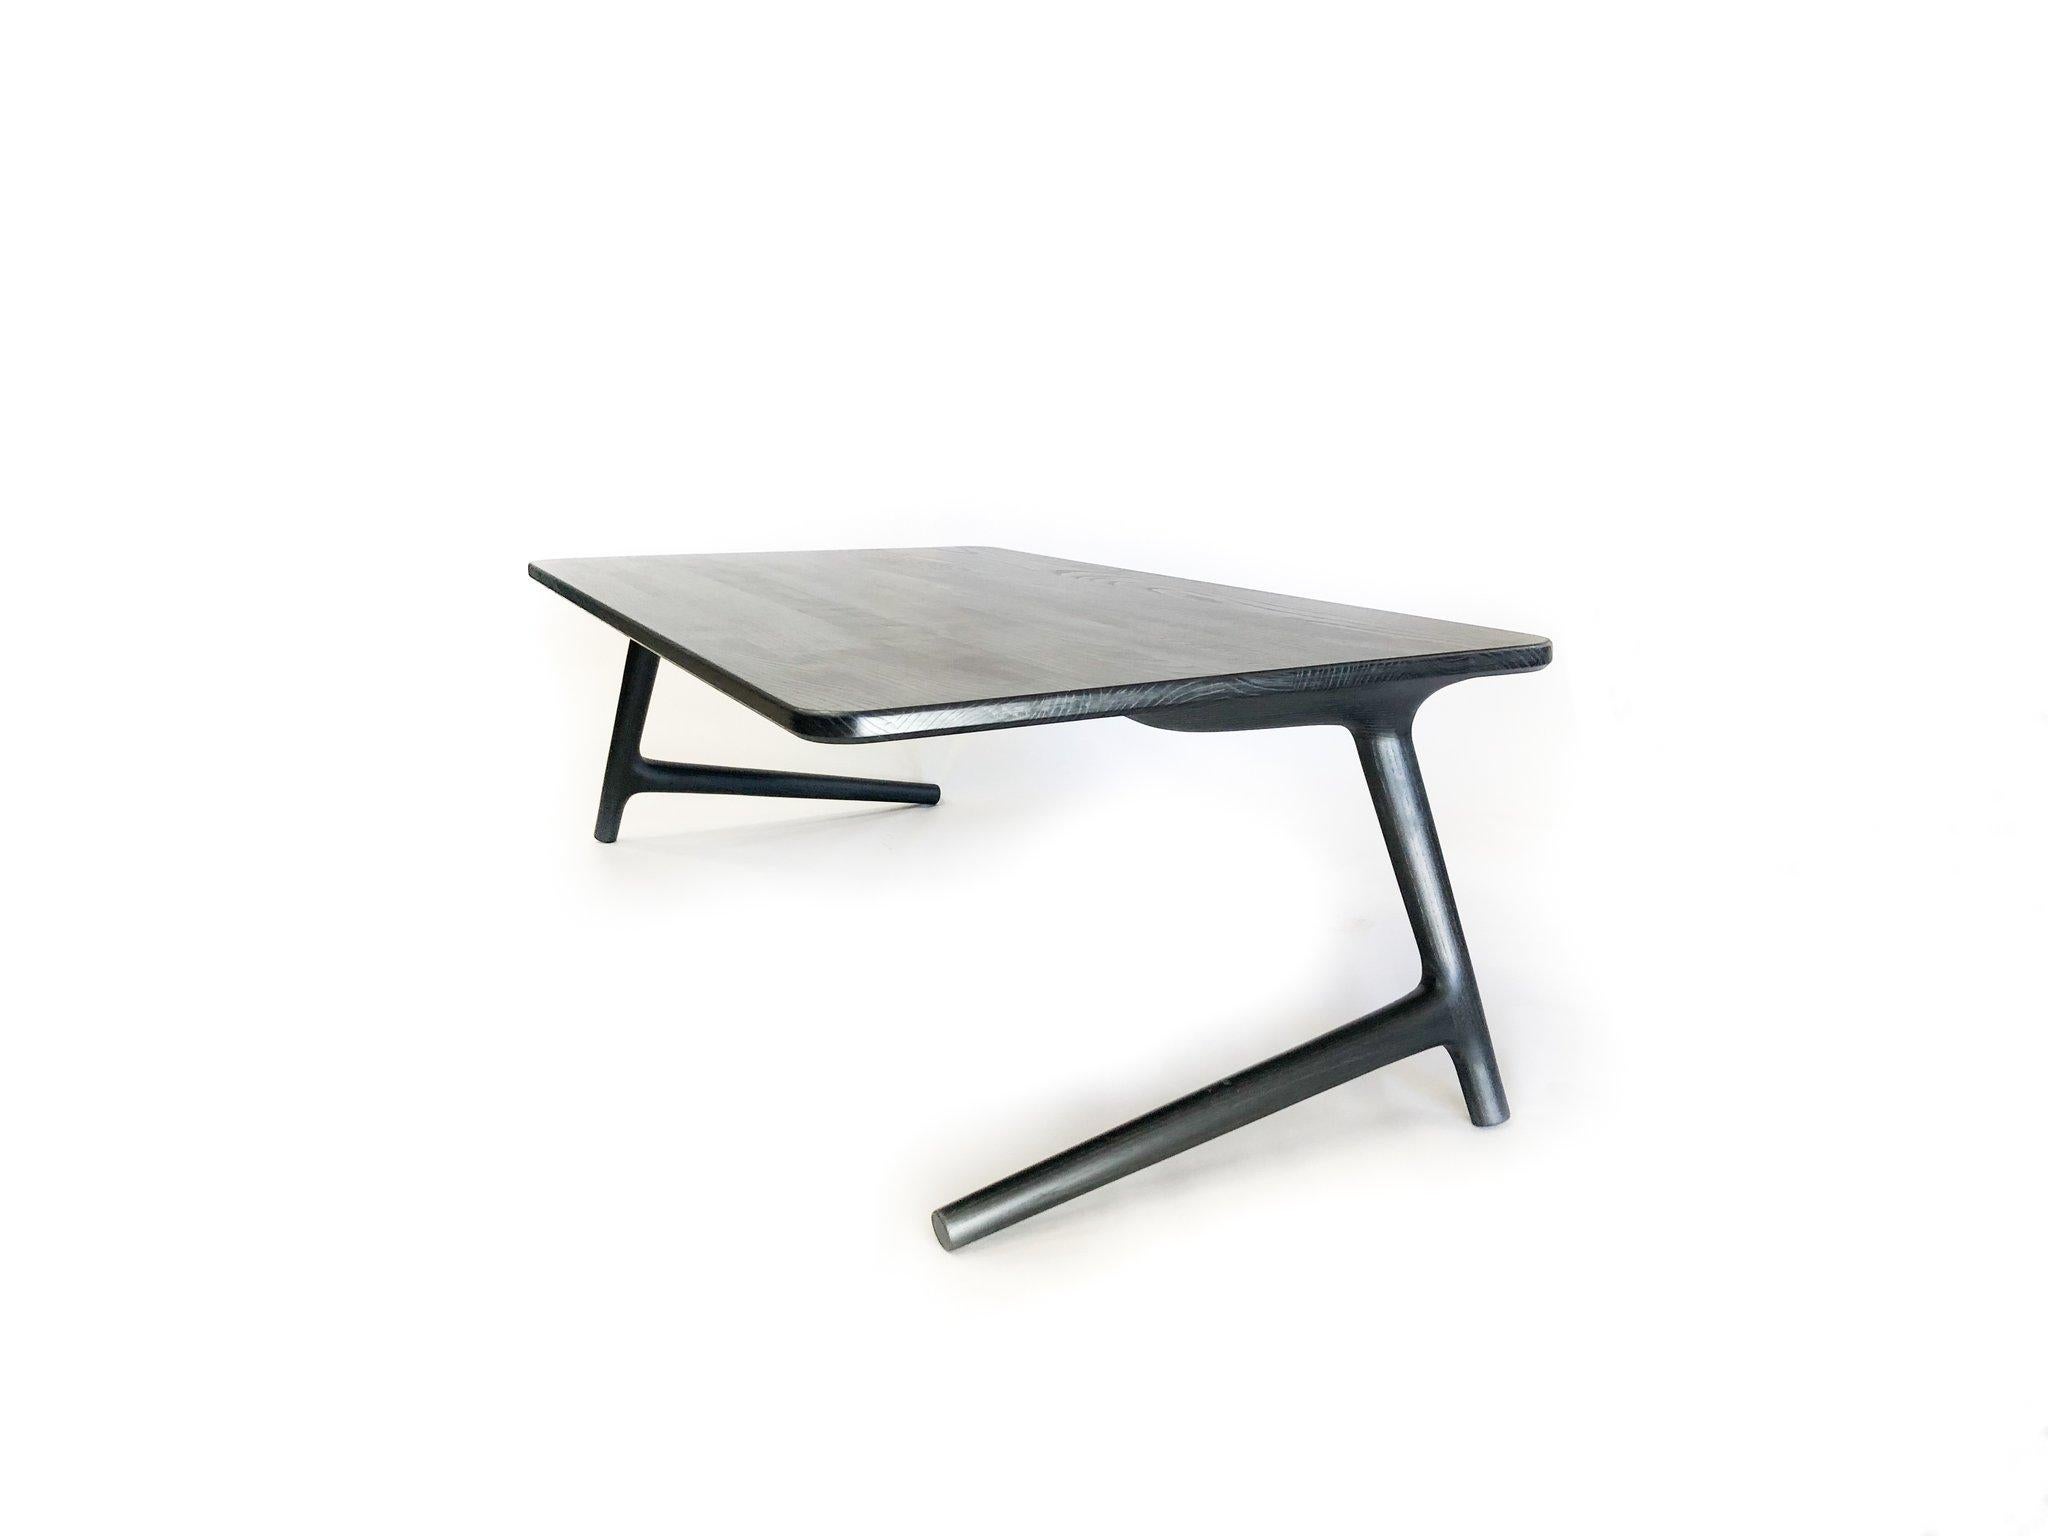 Charcoal ash coffee table by Fernweh Woodworking
Dimensions: W 121.9 x D 60.9 x H 40.6 cm 
Materials: Ash
Also available: Wood options: walnut, charcoal ash, white ash

A beautiful, minimal coffee table for your home. Handmade from Ash wood